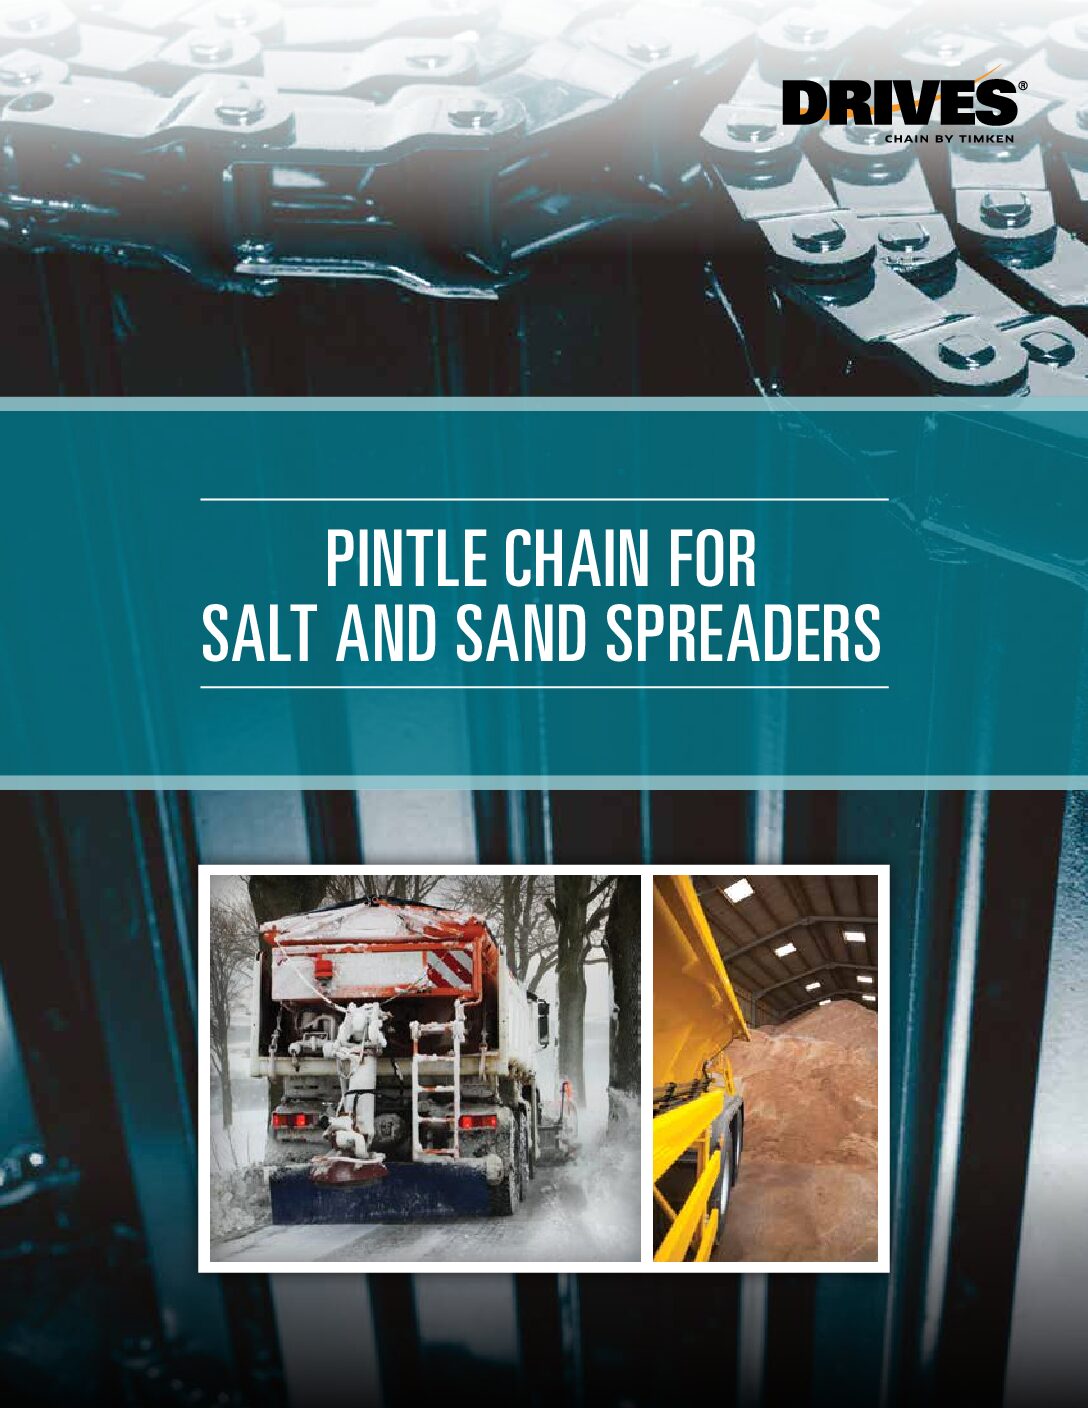 Drives Pintle Chain for Salt and Sand Spreaders